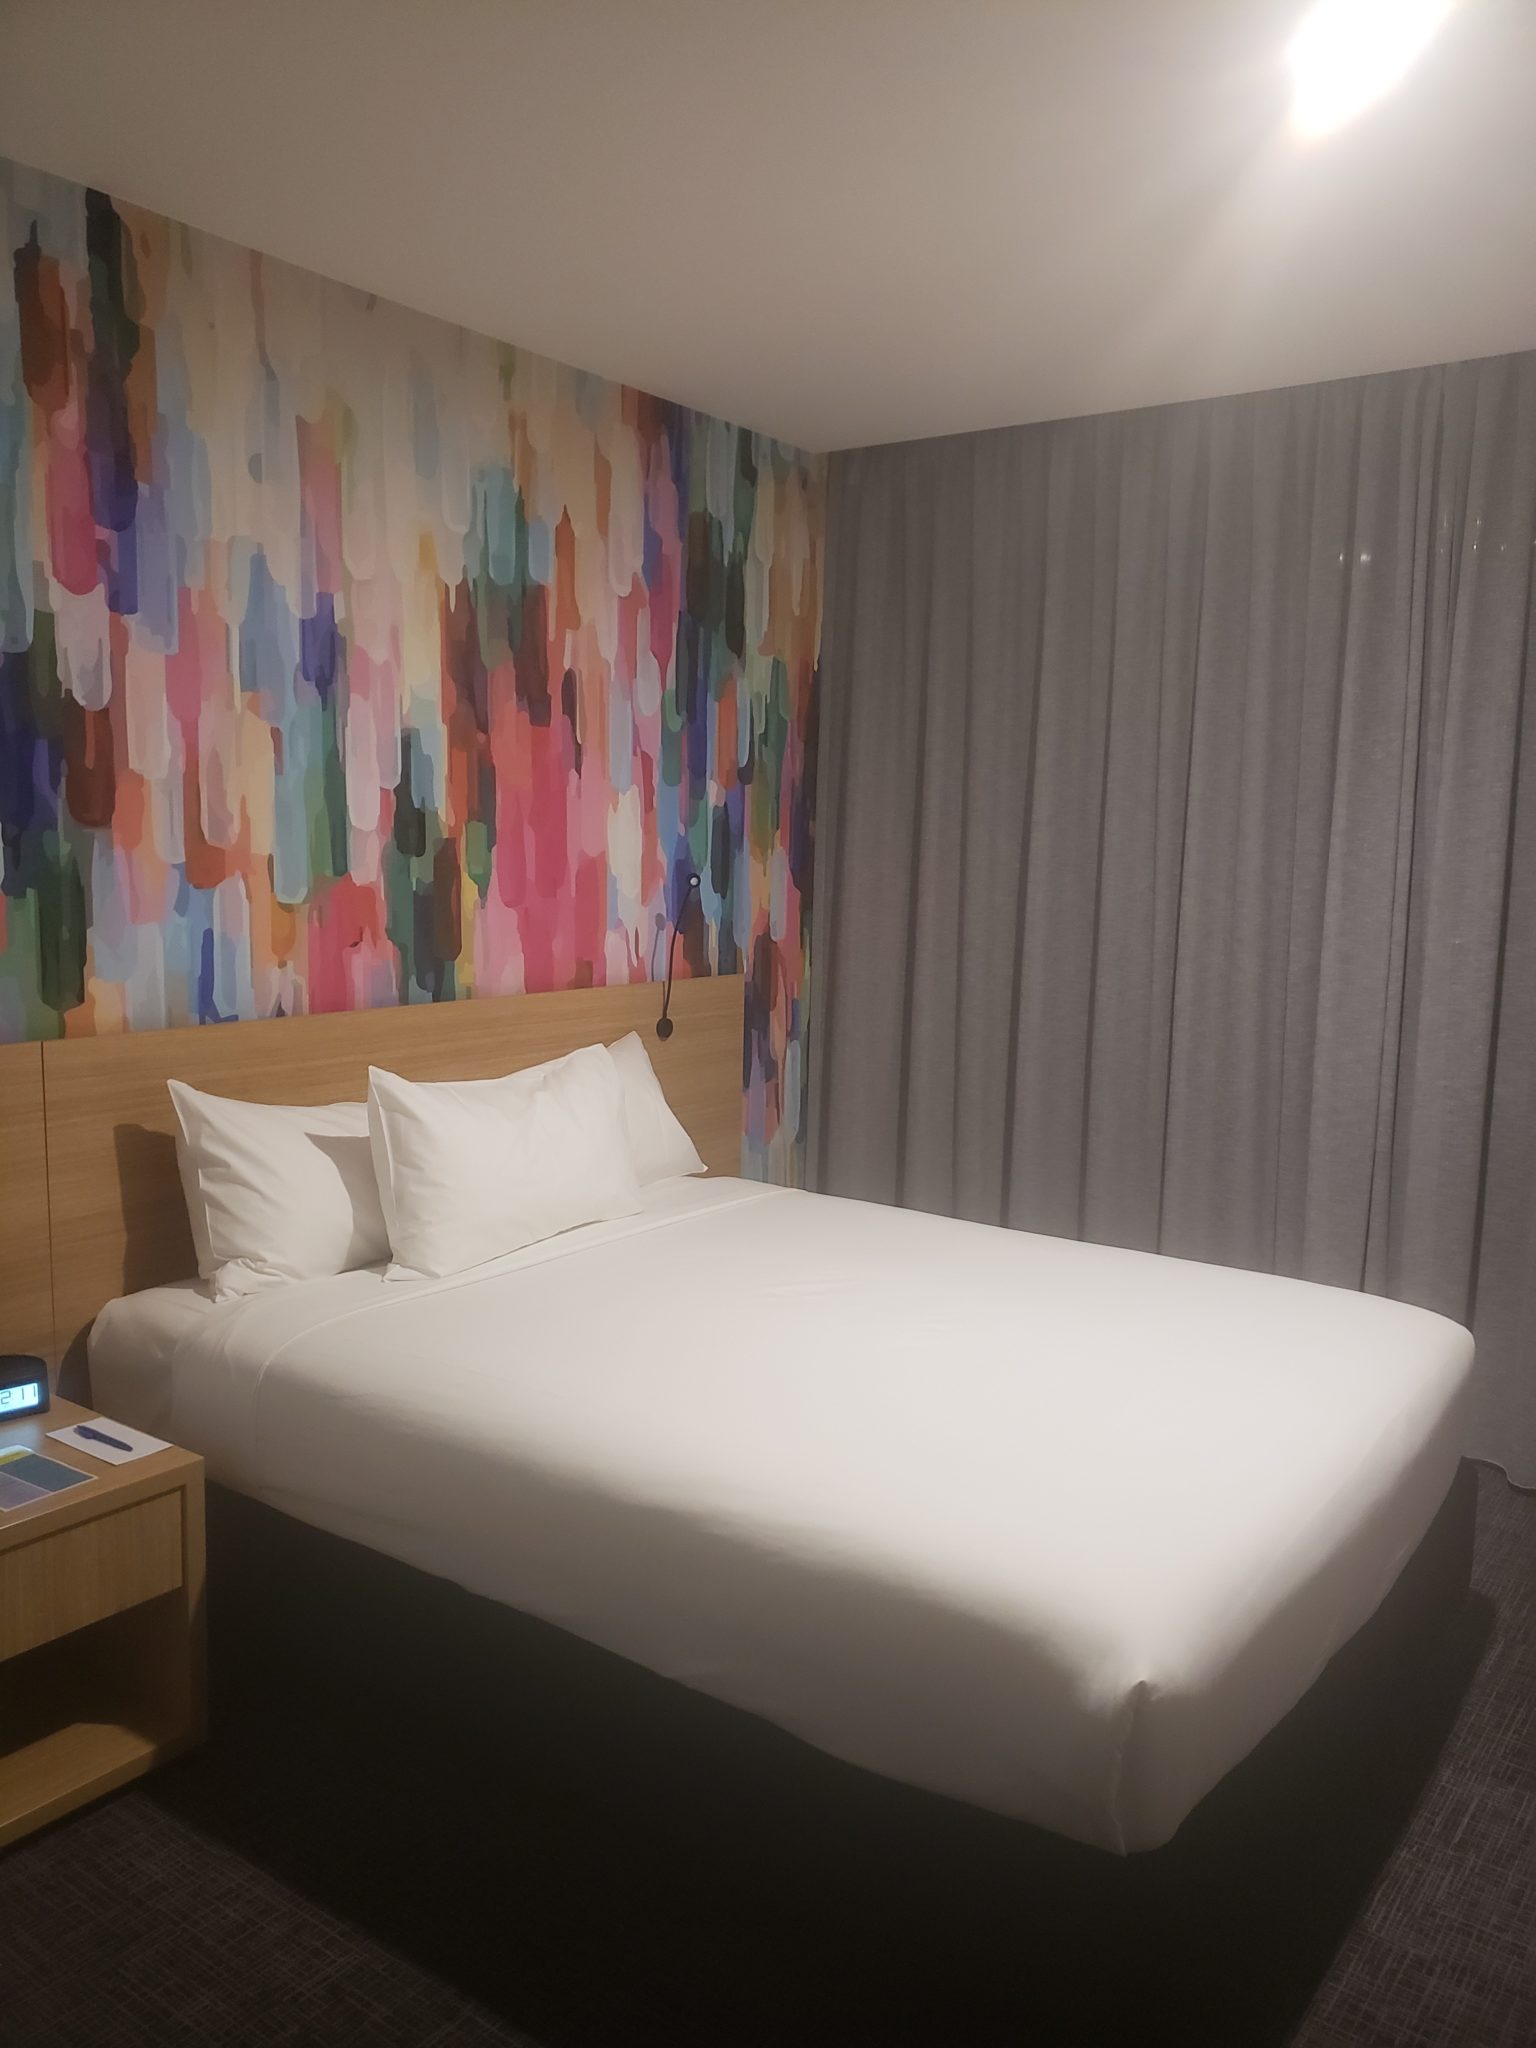 a bed with a colorful wallpaper